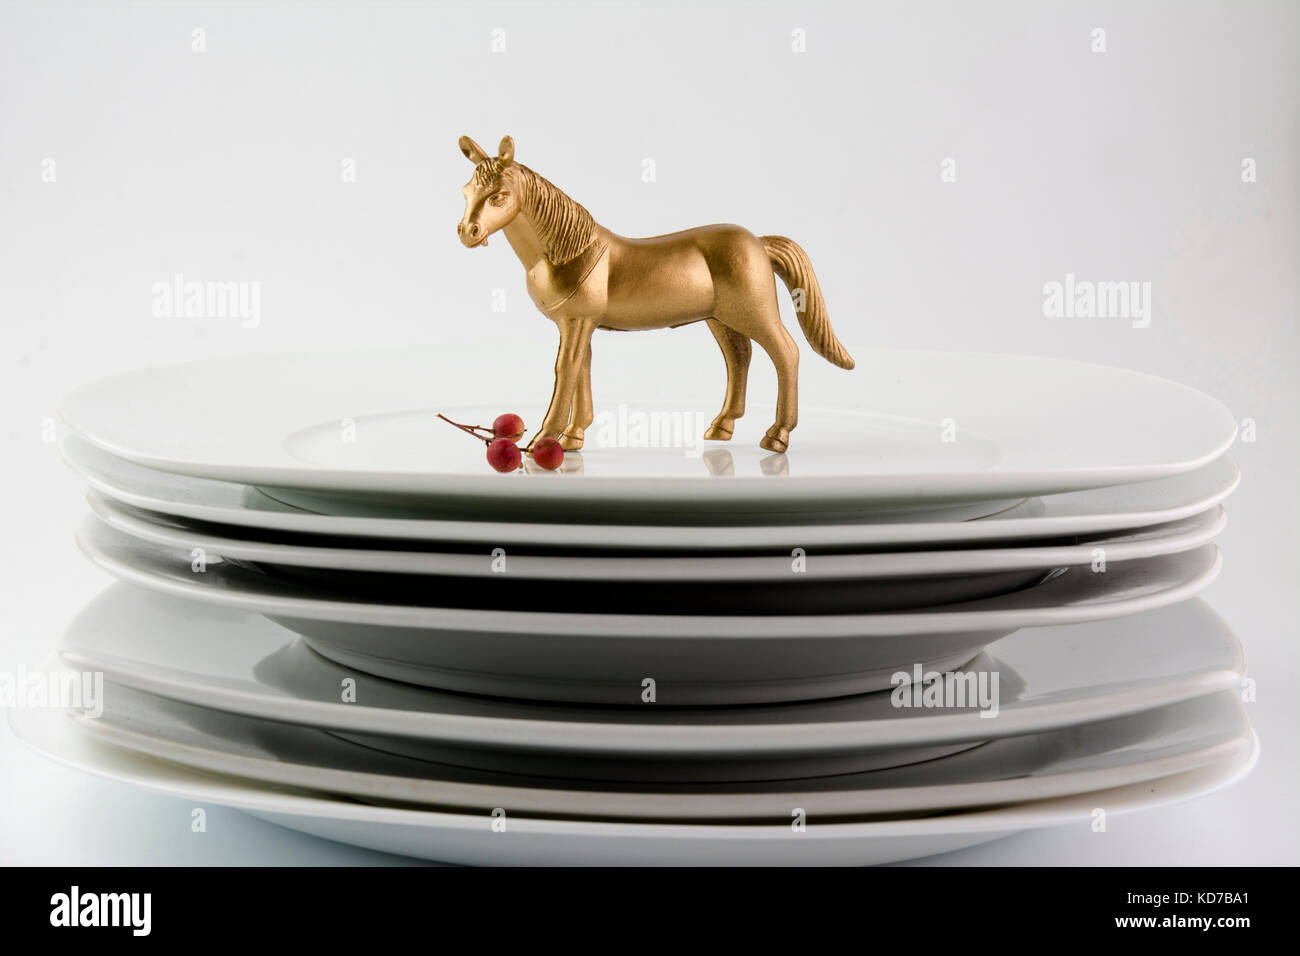 Dishes Plates stacked white and clean tableware and gold horse, conceptual food Stock Photo